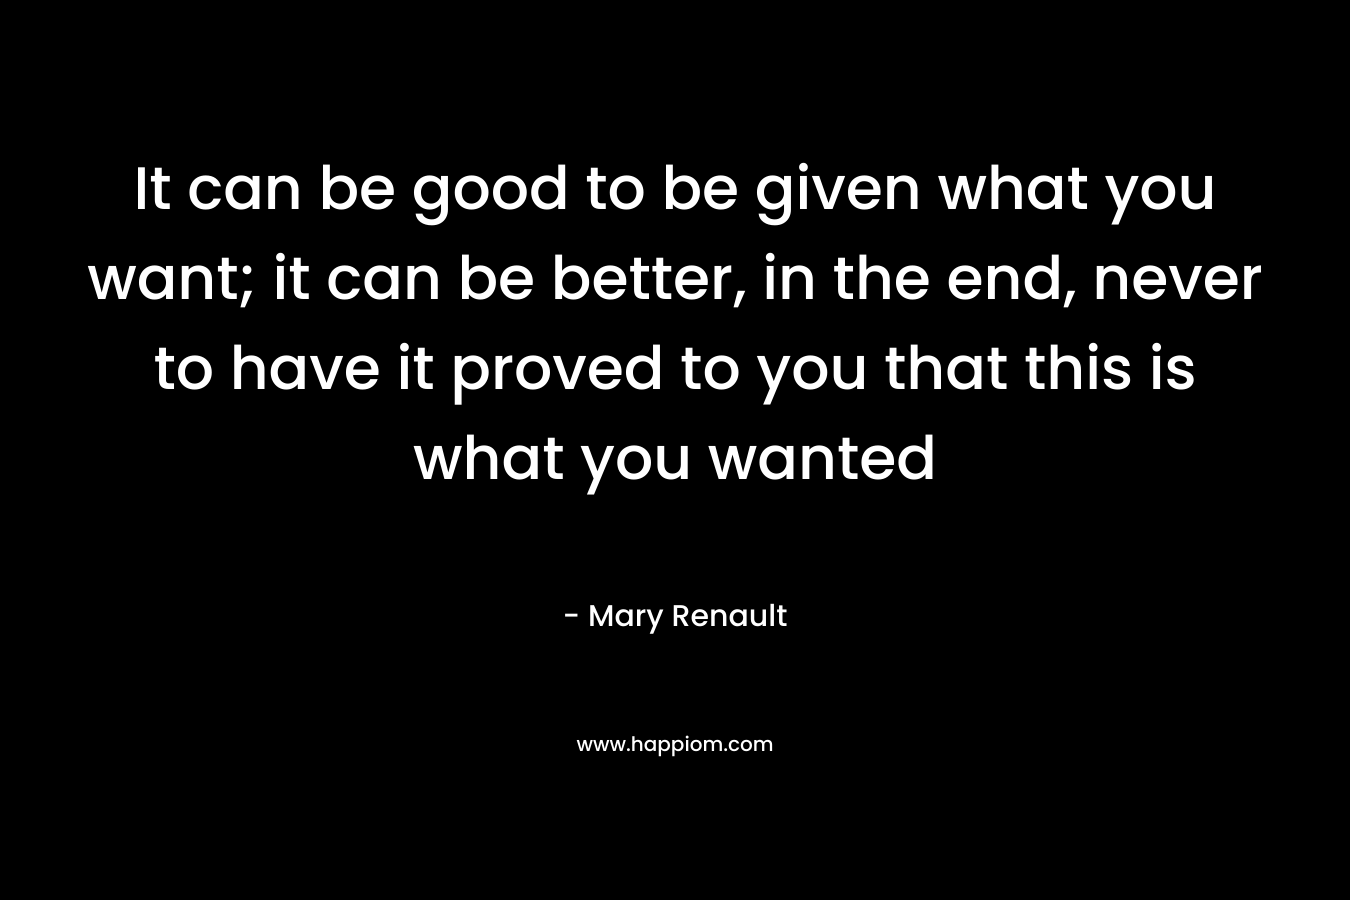 It can be good to be given what you want; it can be better, in the end, never to have it proved to you that this is what you wanted